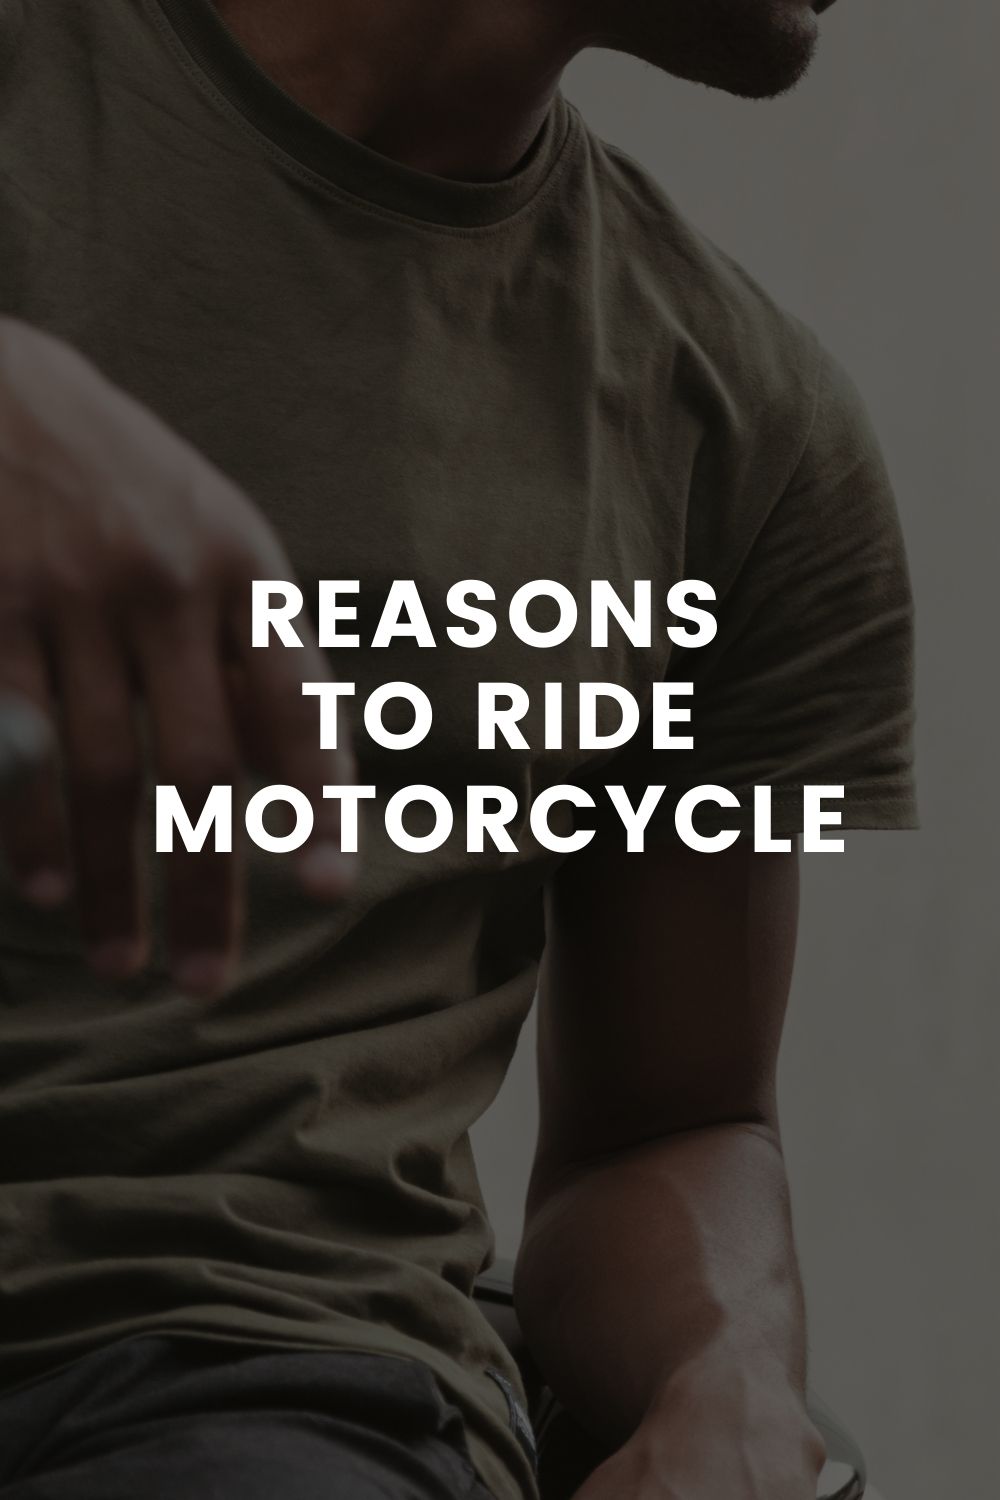 Reasons to Ride Motorcycle